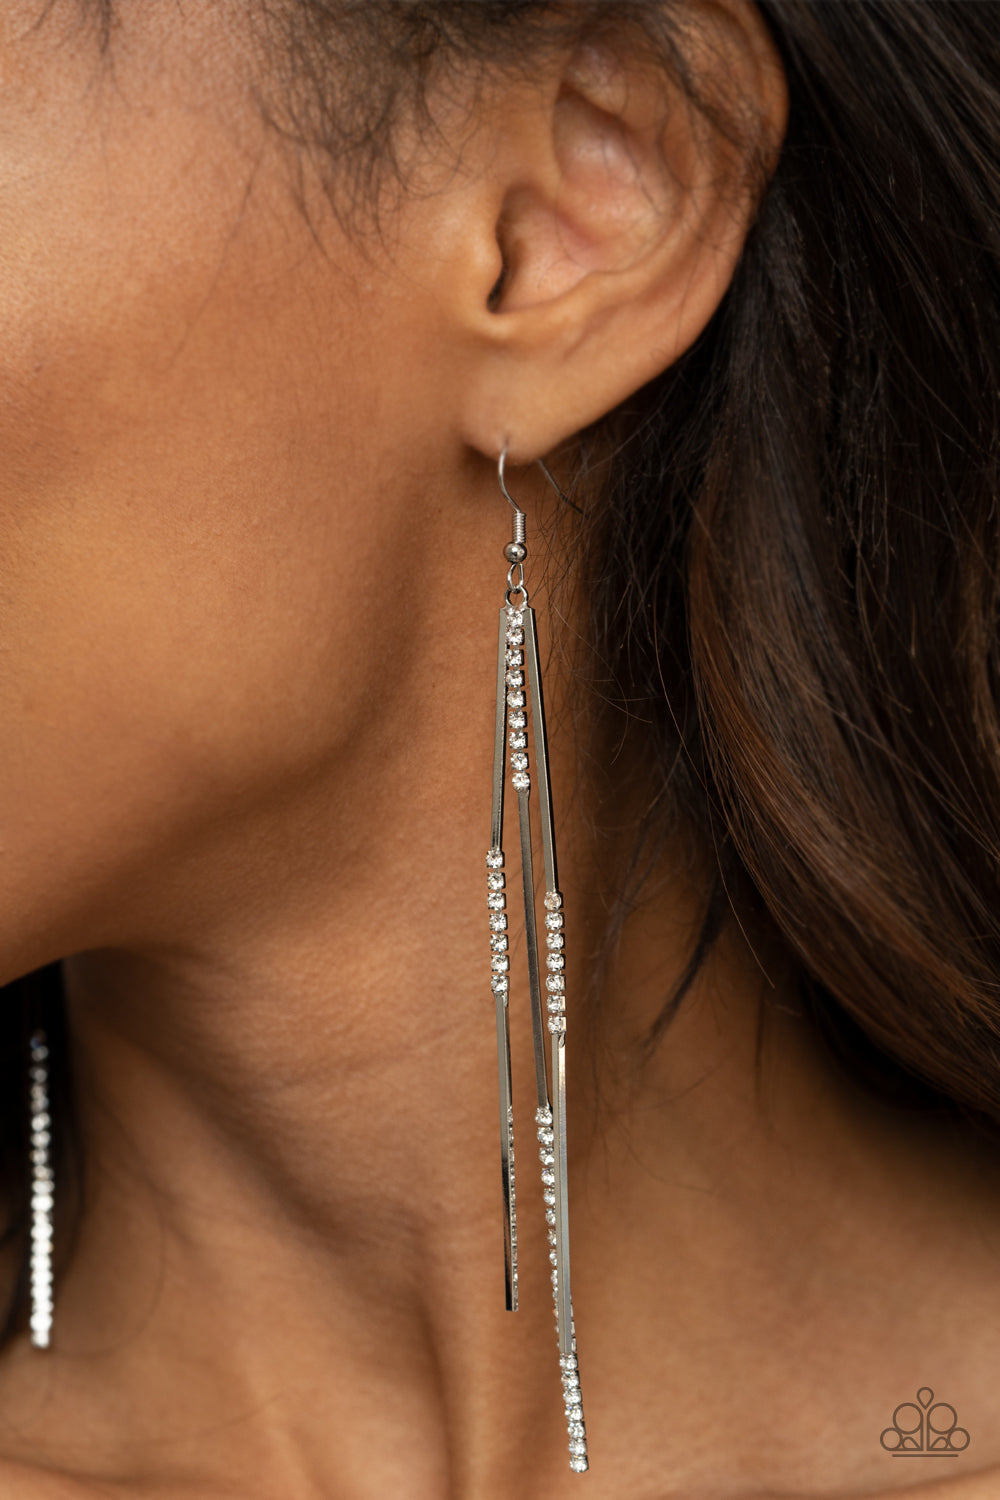 Dainty Dynamism White Earring - Paparazzi Accessories  Sections of glassy white rhinestones attach to dainty silver rectangular rods, creating a statement-making tassel. Earring attaches to a standard fishhook fitting.  ﻿All Paparazzi Accessories are lead free and nickel free!  Sold as one pair of earrings.